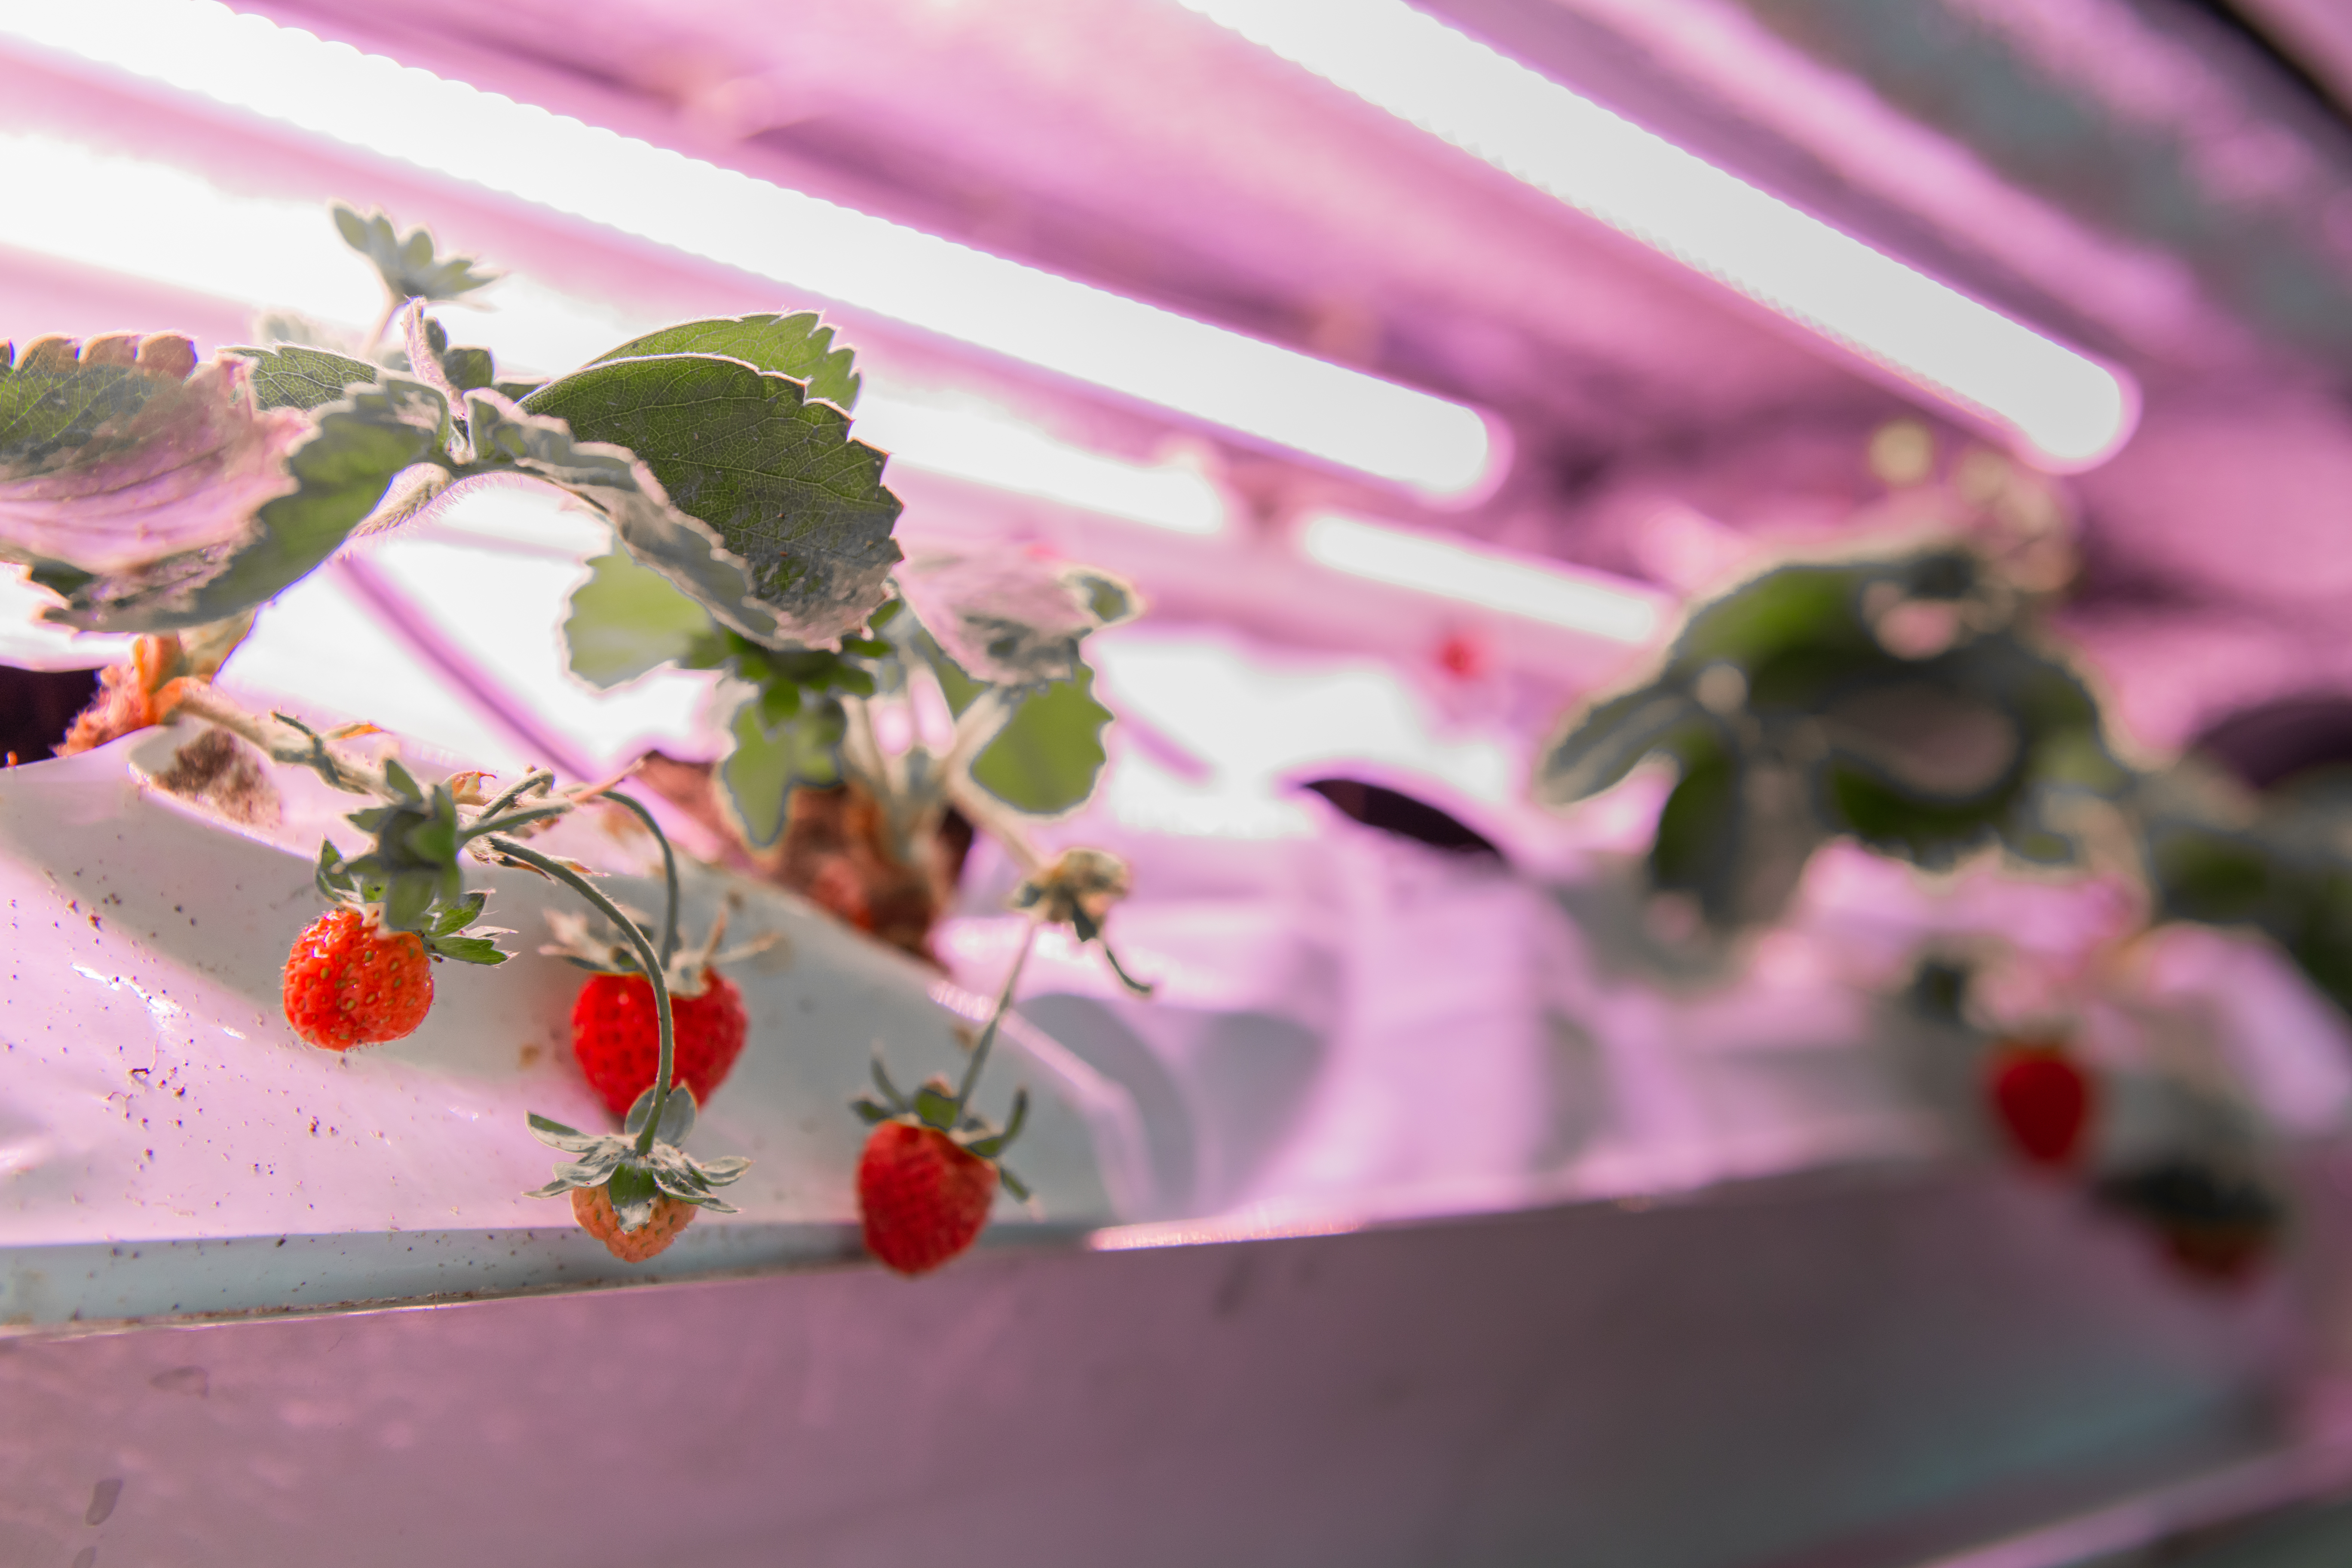 Singrow uses agrotechnology to grow premium fruits and crops, and has successfully cultivated the first white strawberry variety developed in a tropical country, and developed a faster indoor hydroponic strawberry cultivation method. 